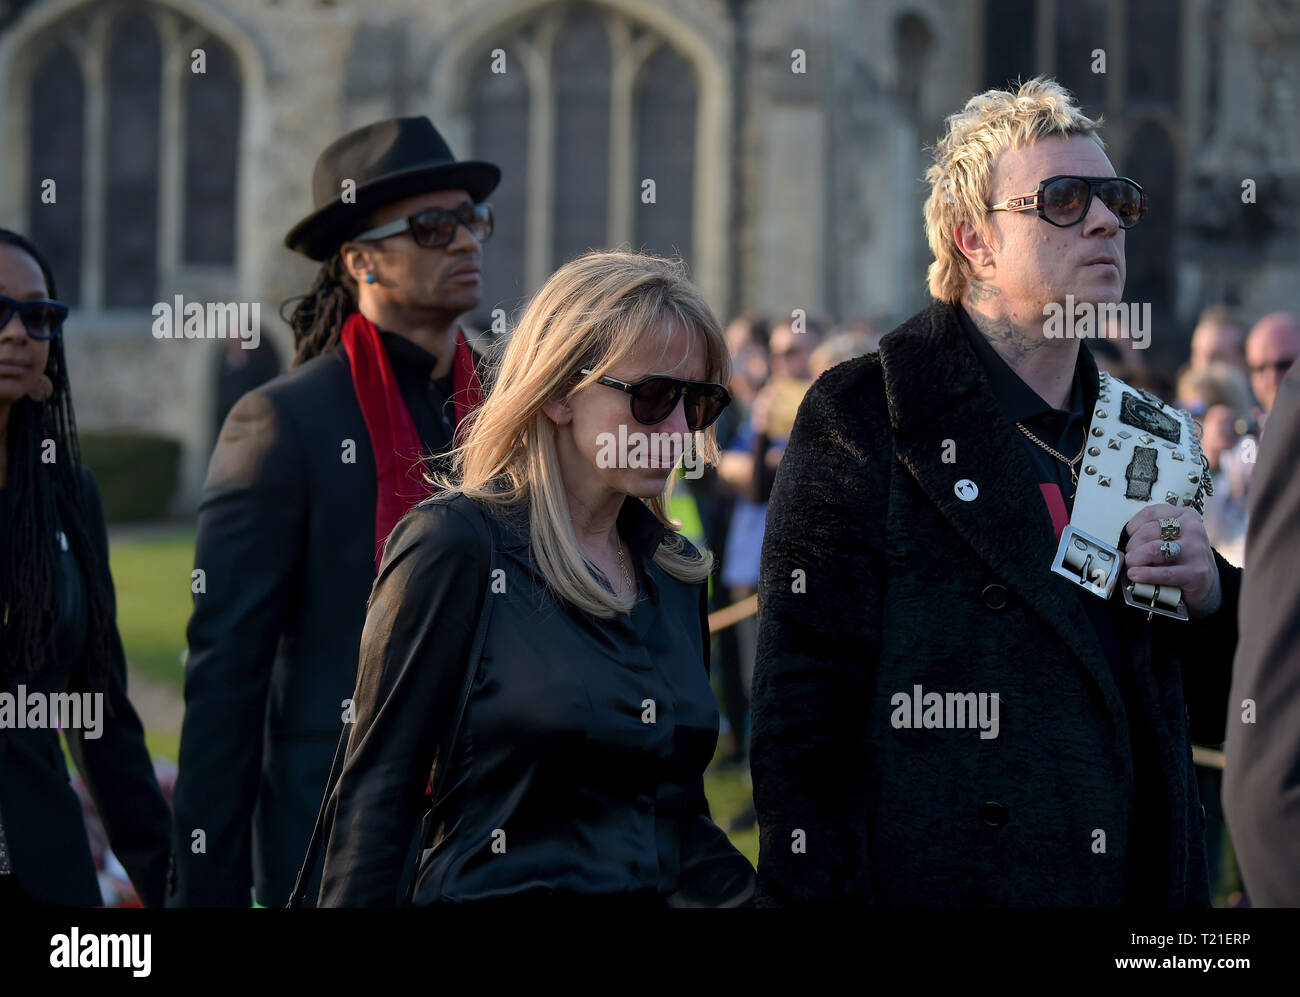 Bocking, Essex, UK. 29th Mar 2019. Band mate Liam Howlett with wife Natalie Appleton arrive at The Funeral of Keith Flint lead singer of The Prodigy takes place at St Mary's Church in Bocking near Braintree Essex. Flint was found dead at his home in North End Essex aged 49 on 4th March 2019 Credit: MARTIN DALTON/Alamy Live News Stock Photo